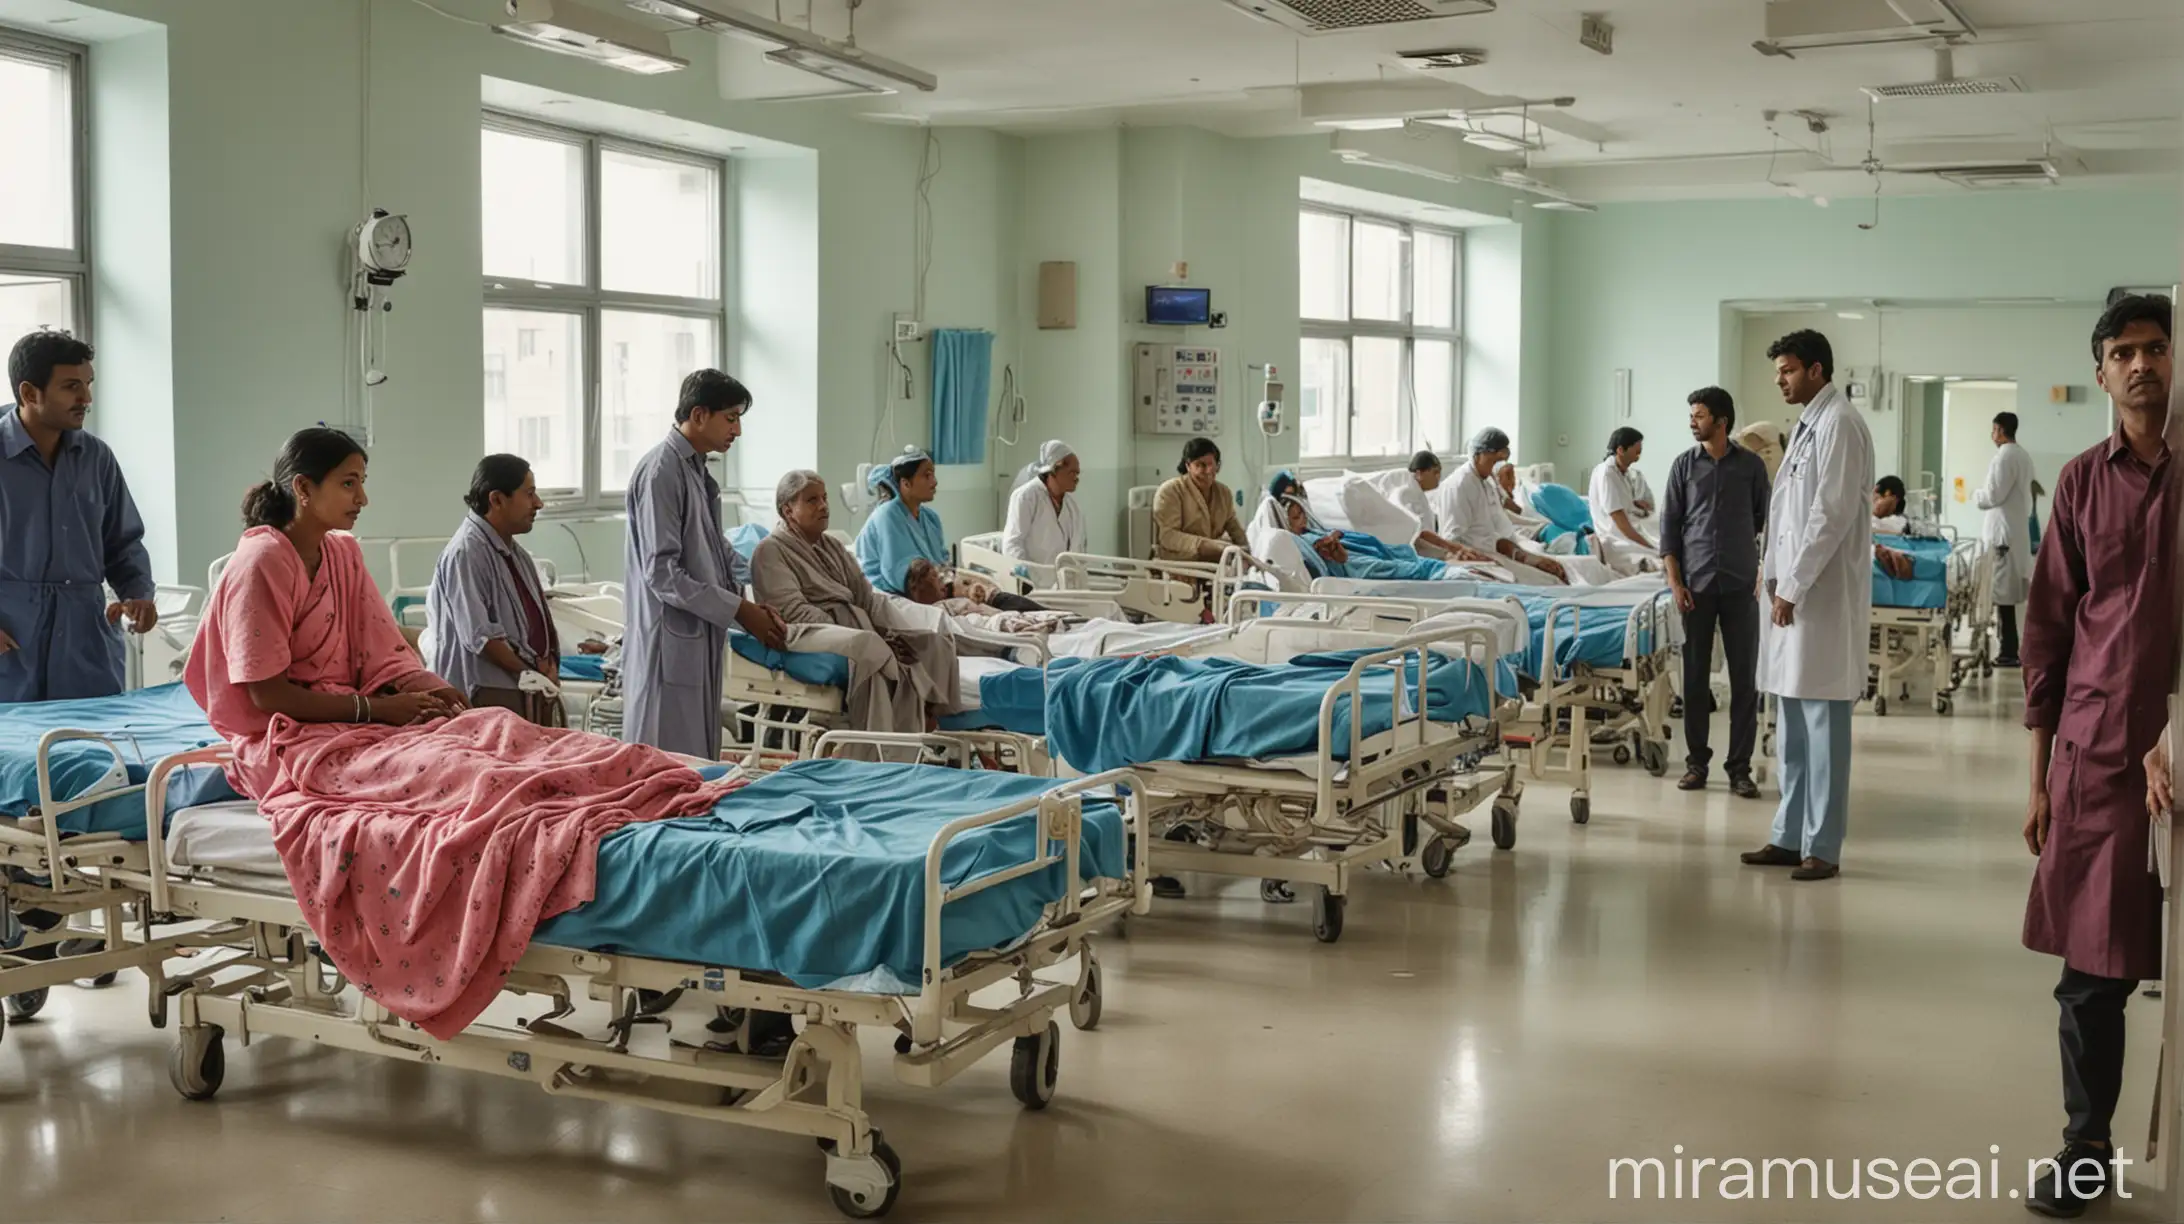 hospital scene, many indian patients on hospital bed,